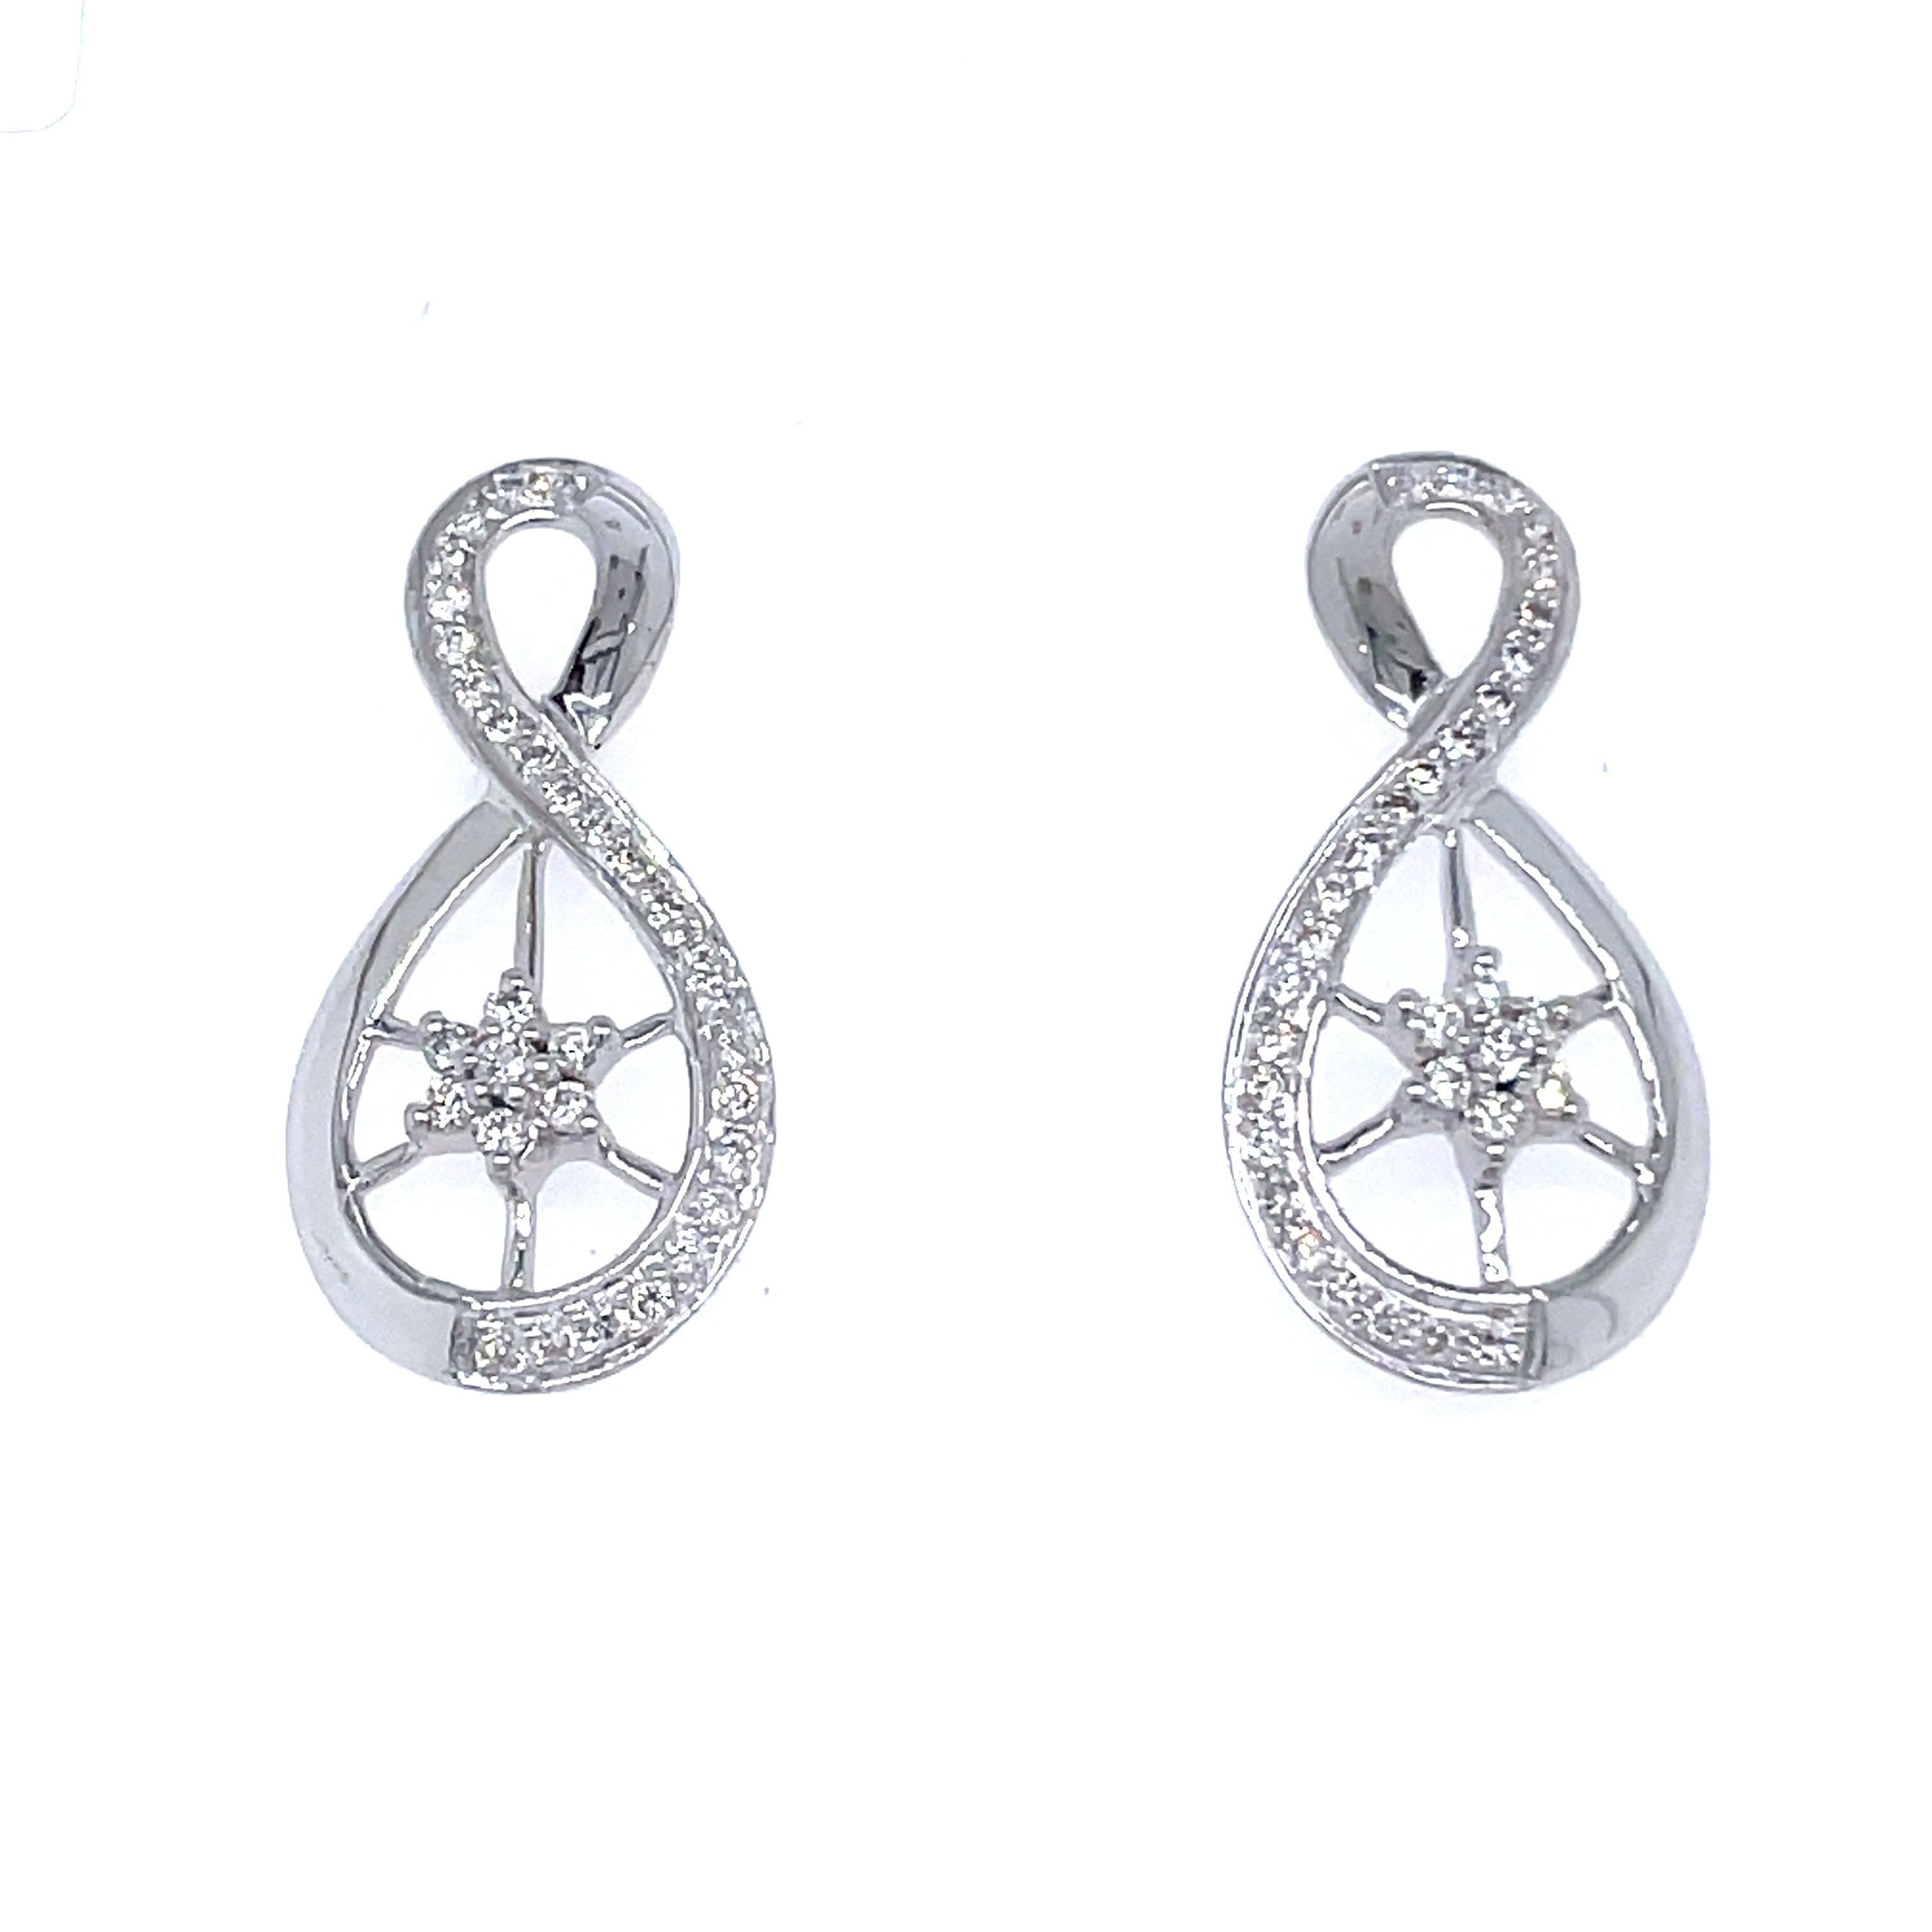 18k White Gold Infinity Diamond Earrings

Fashioned from 18k white gold, boasting a substantial weight of 4.90 grams, these earrings are more than mere adornments; they are a declaration of opulence. 

The resplendent white gold setting serves as